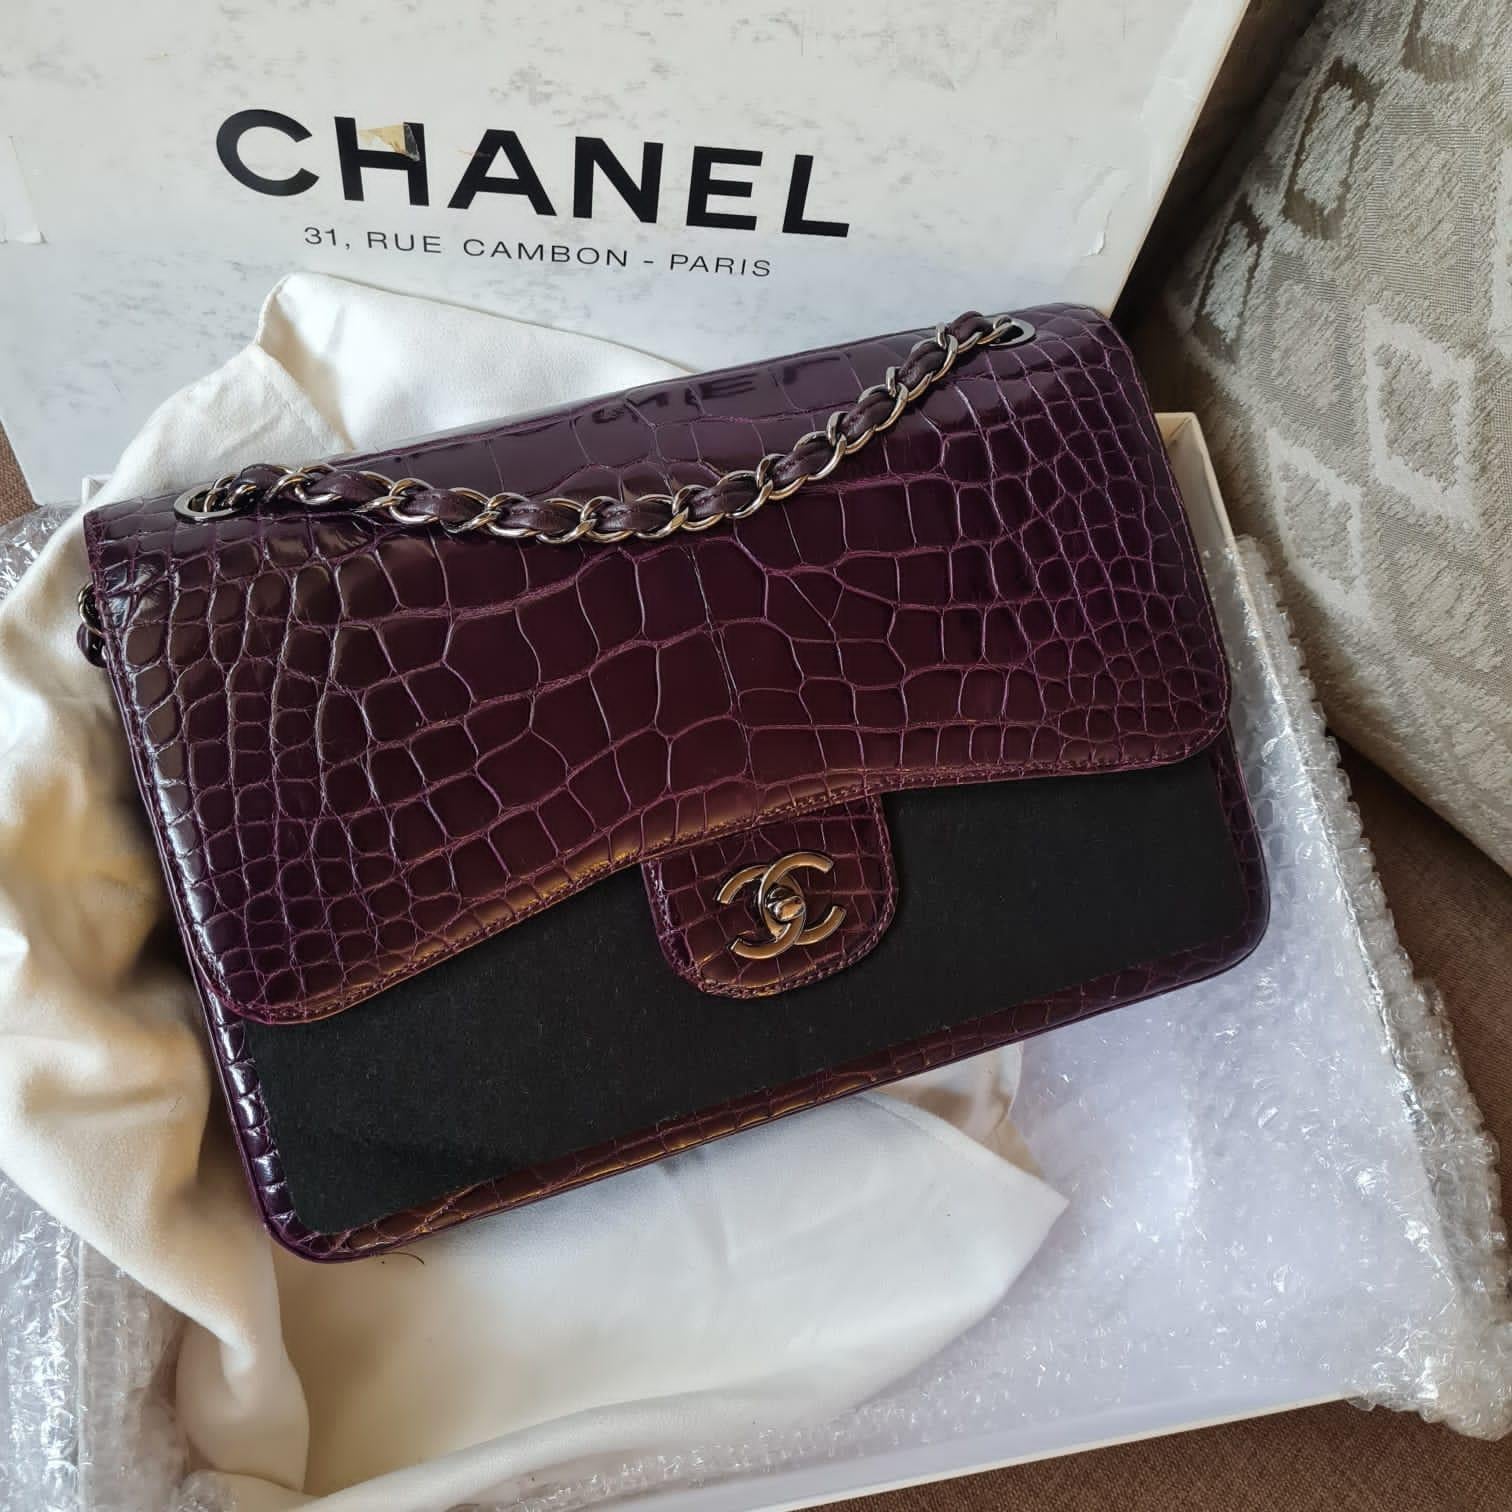 Shiny Alligator with silver hardware in excellent condition. Rare amethyst colour. As we know, Chanel has stopped its exotic leather production since 2018. Rare collection piece that came by.

Serial Number: #15537581

Inclusion: Authenticity Card,